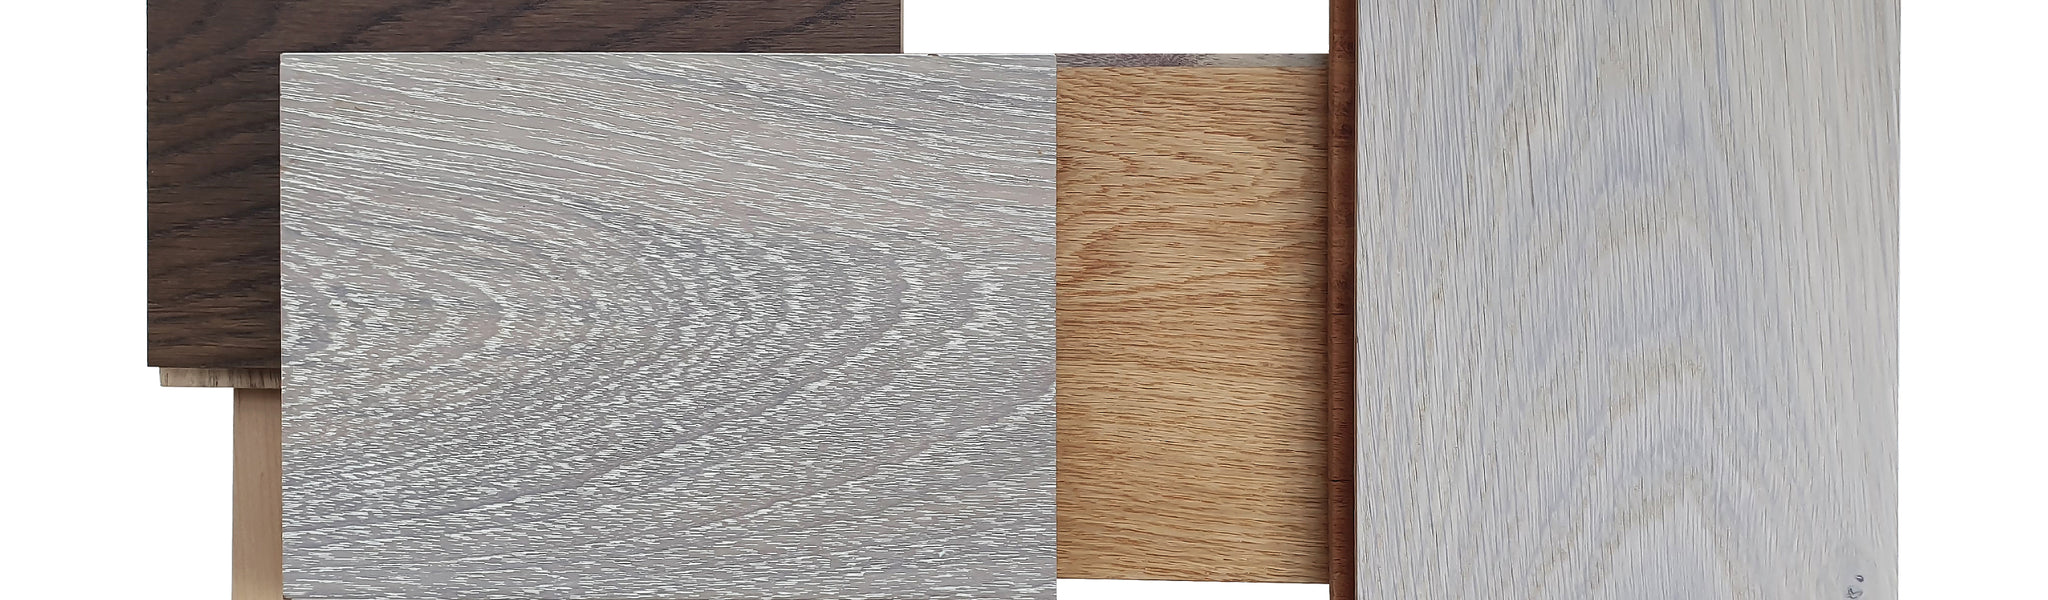 Discover Your Perfect Wood Flooring: Order Free Samples Today for Confident Choices!